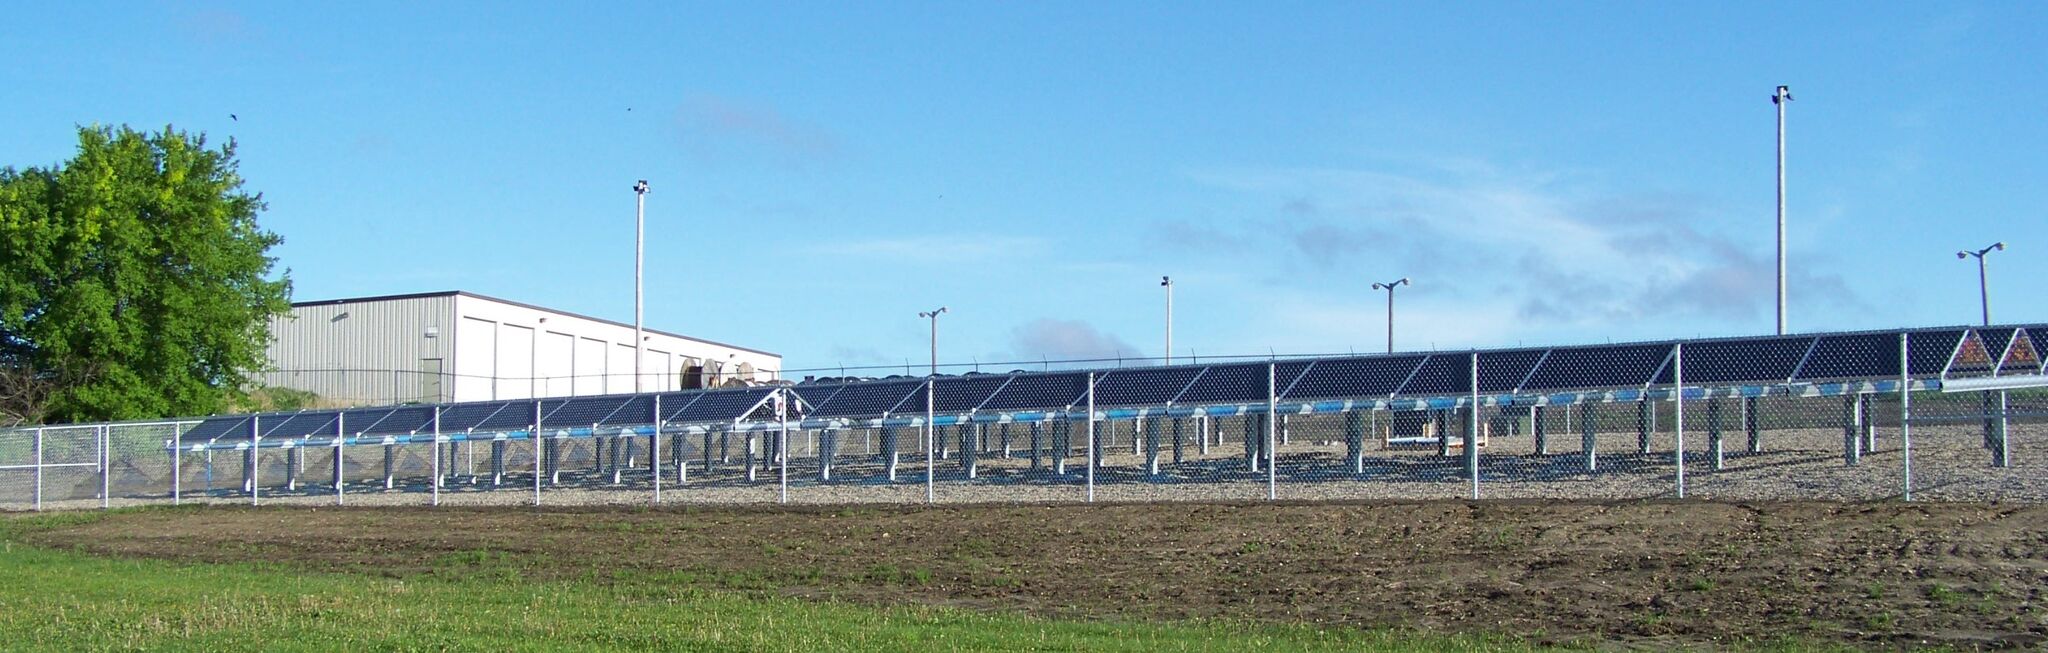 row of solar panels in the community